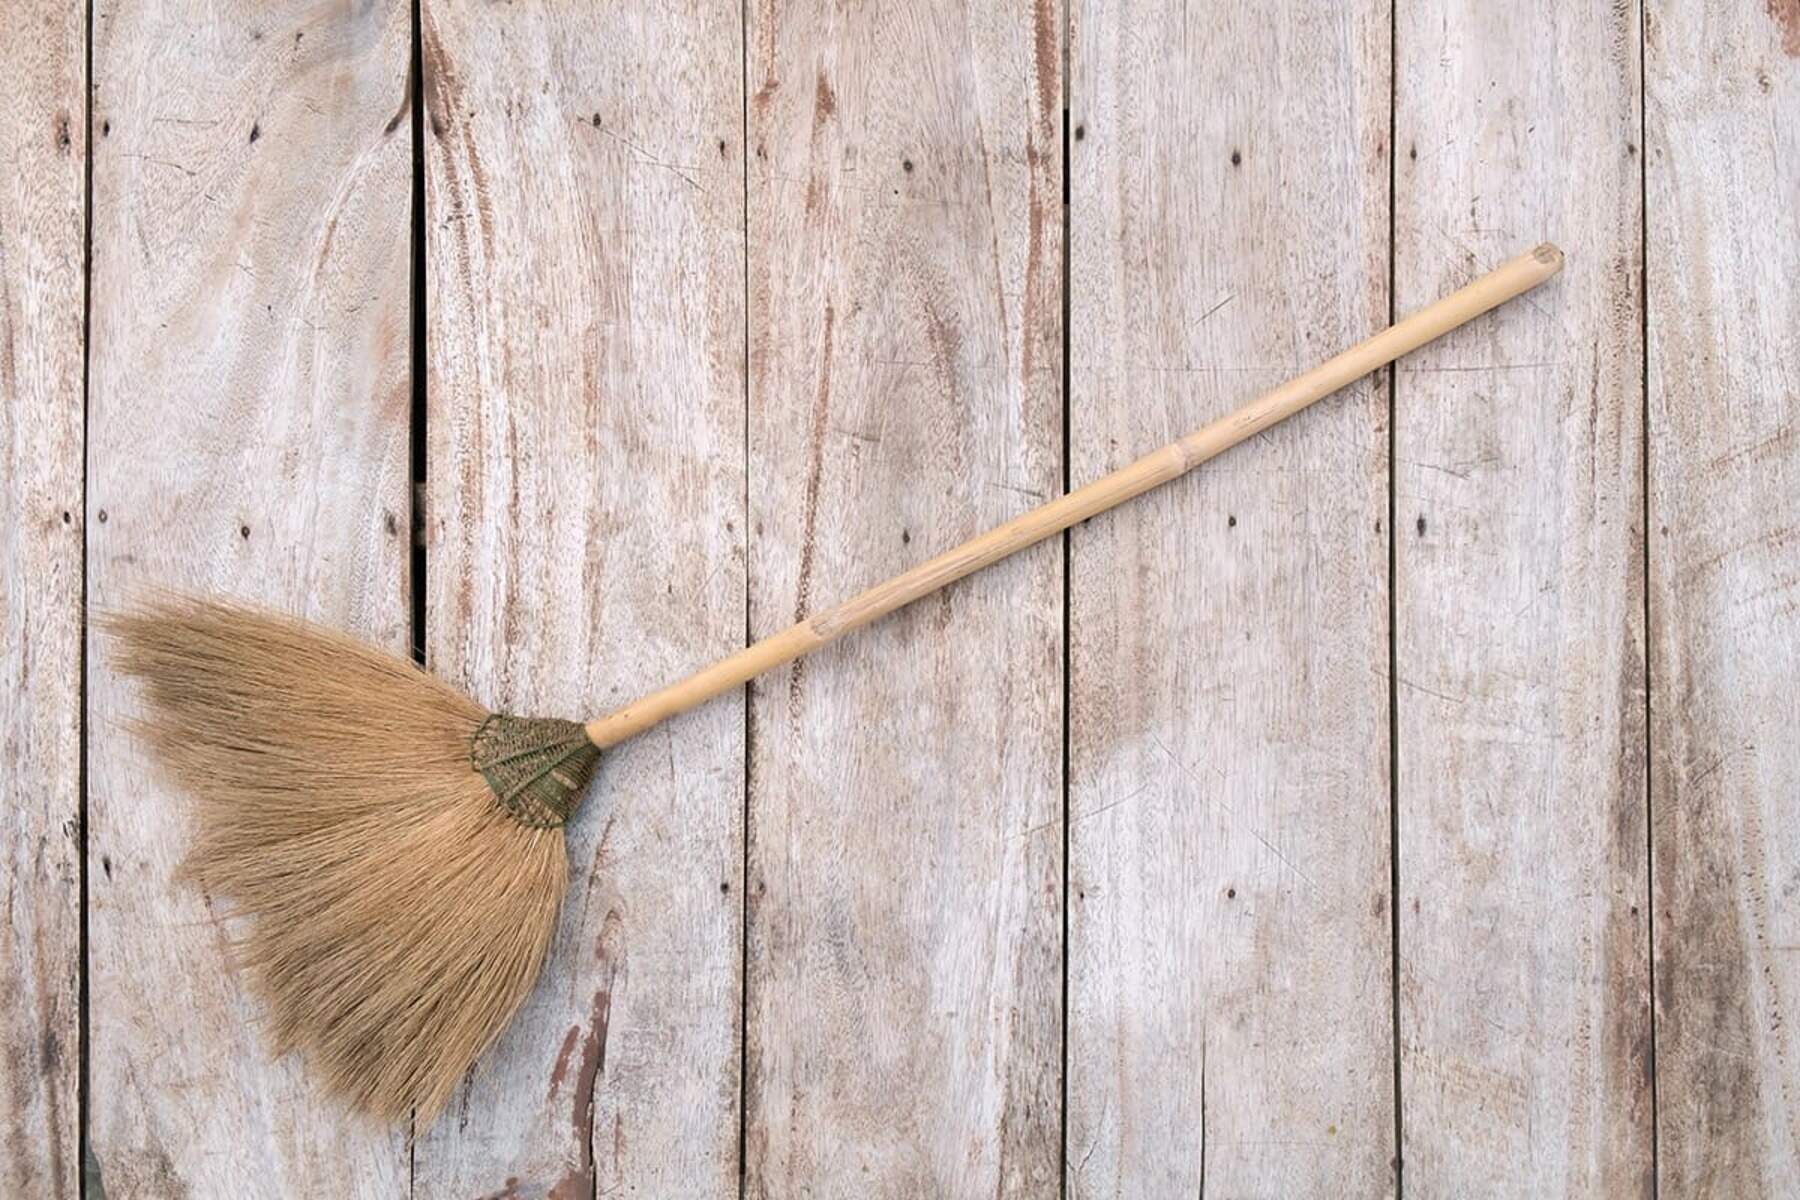 When Was The Broom Invented